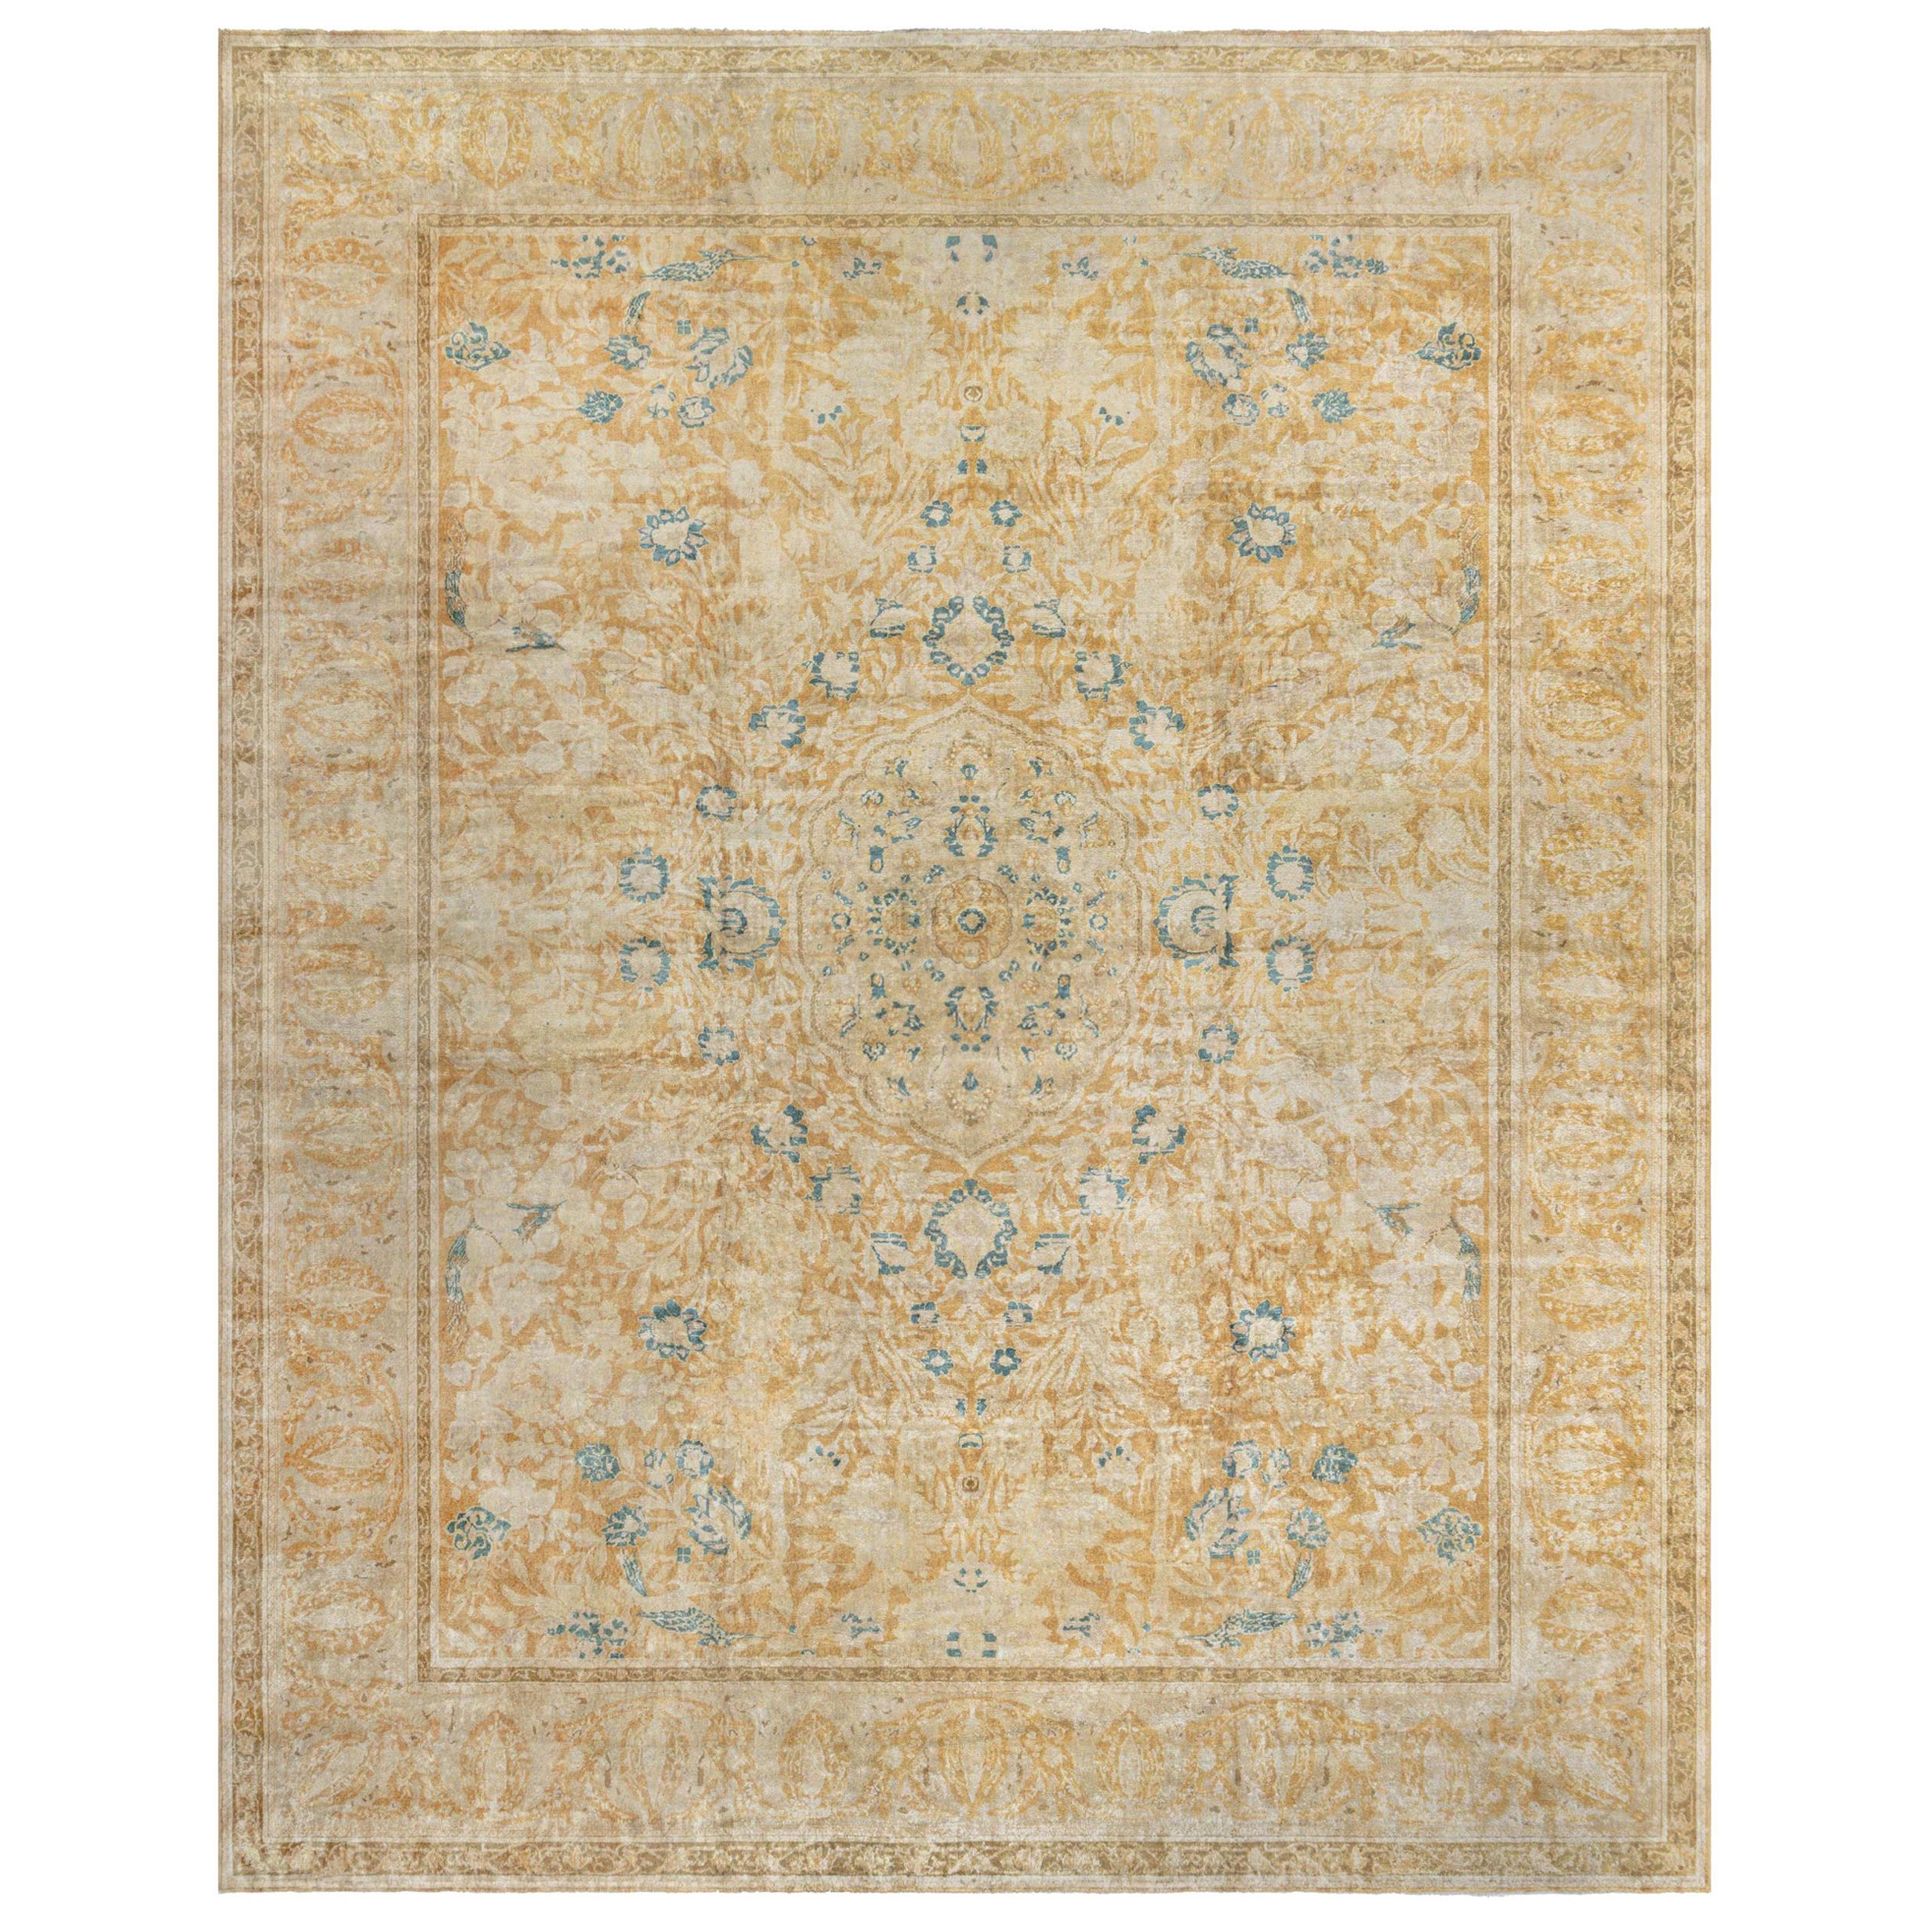 Authentic 19th Century Indian Beige Wool Rug For Sale